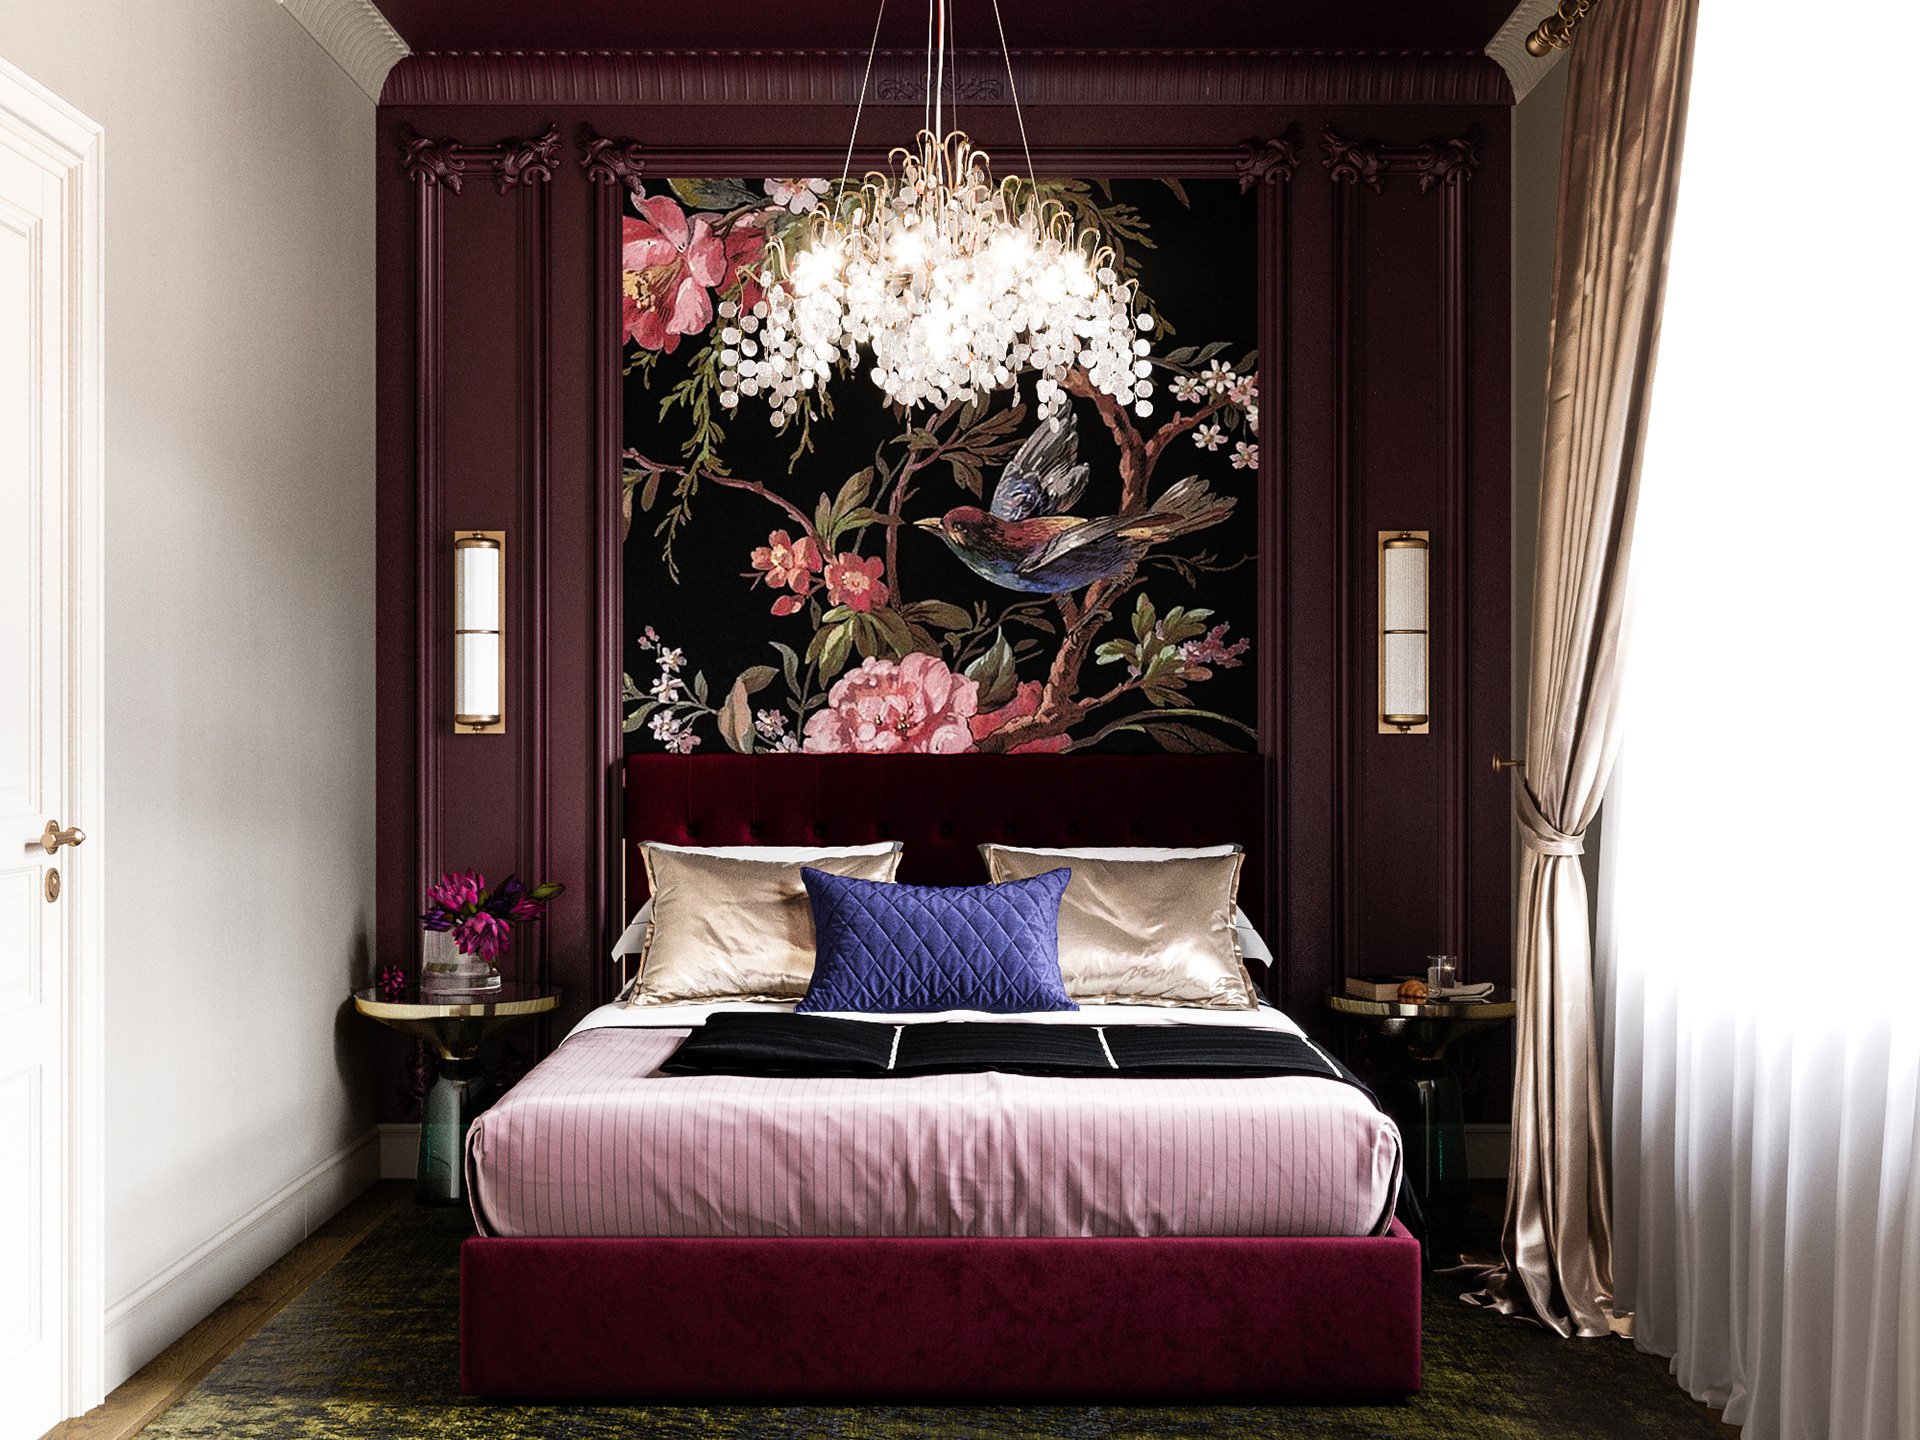 Burbundy Accent Wall With Molding and Dark Floral Mural, Golden Curains And Velver Queen Size Bed